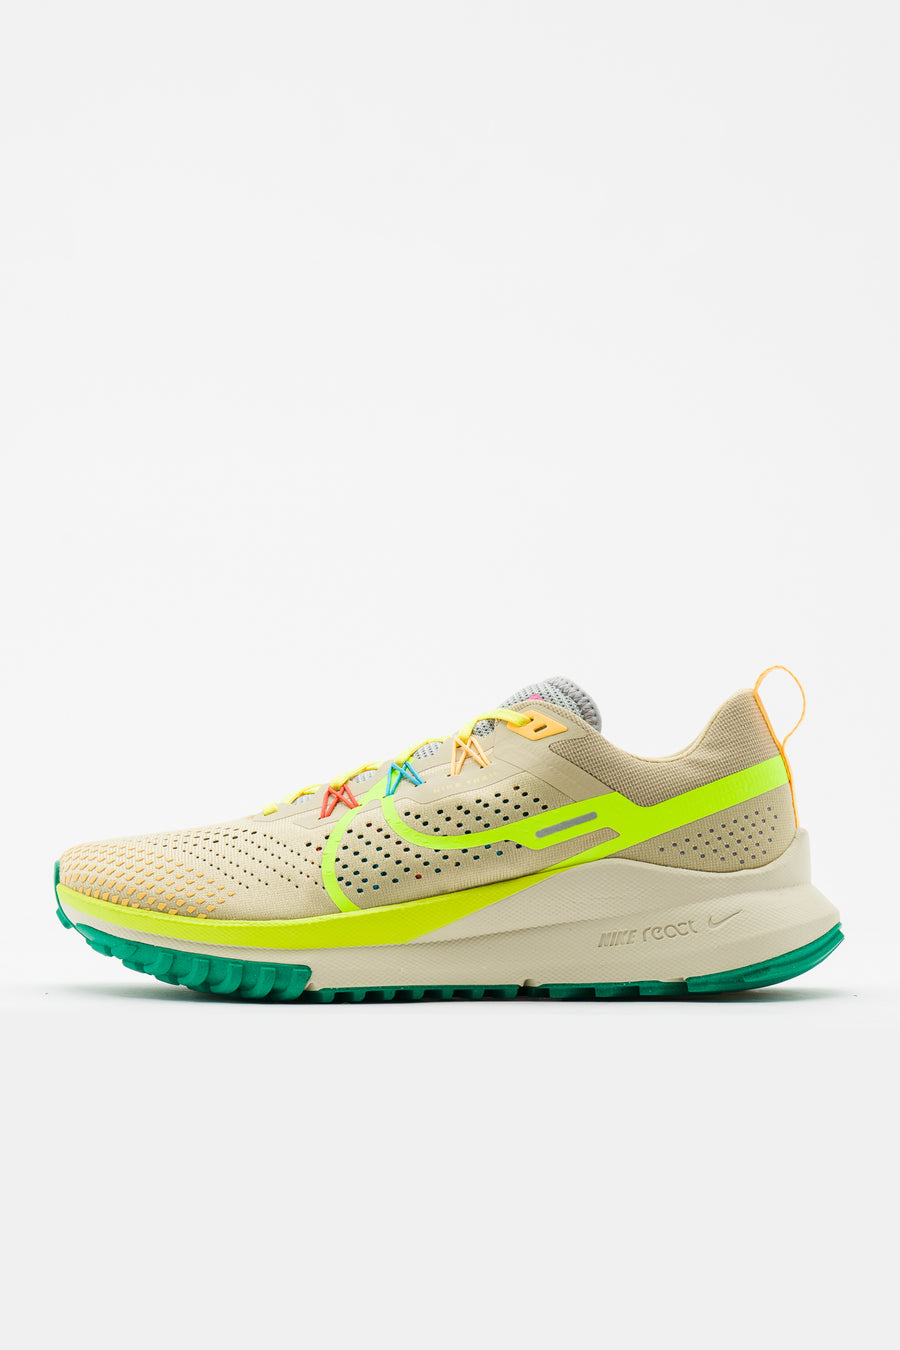 routine Reductor Goed Nike - Men's React Pegasus Trail 4 Sneaker in Team Gold/Volt/Baltic  Blue/Stadium Green - Notre